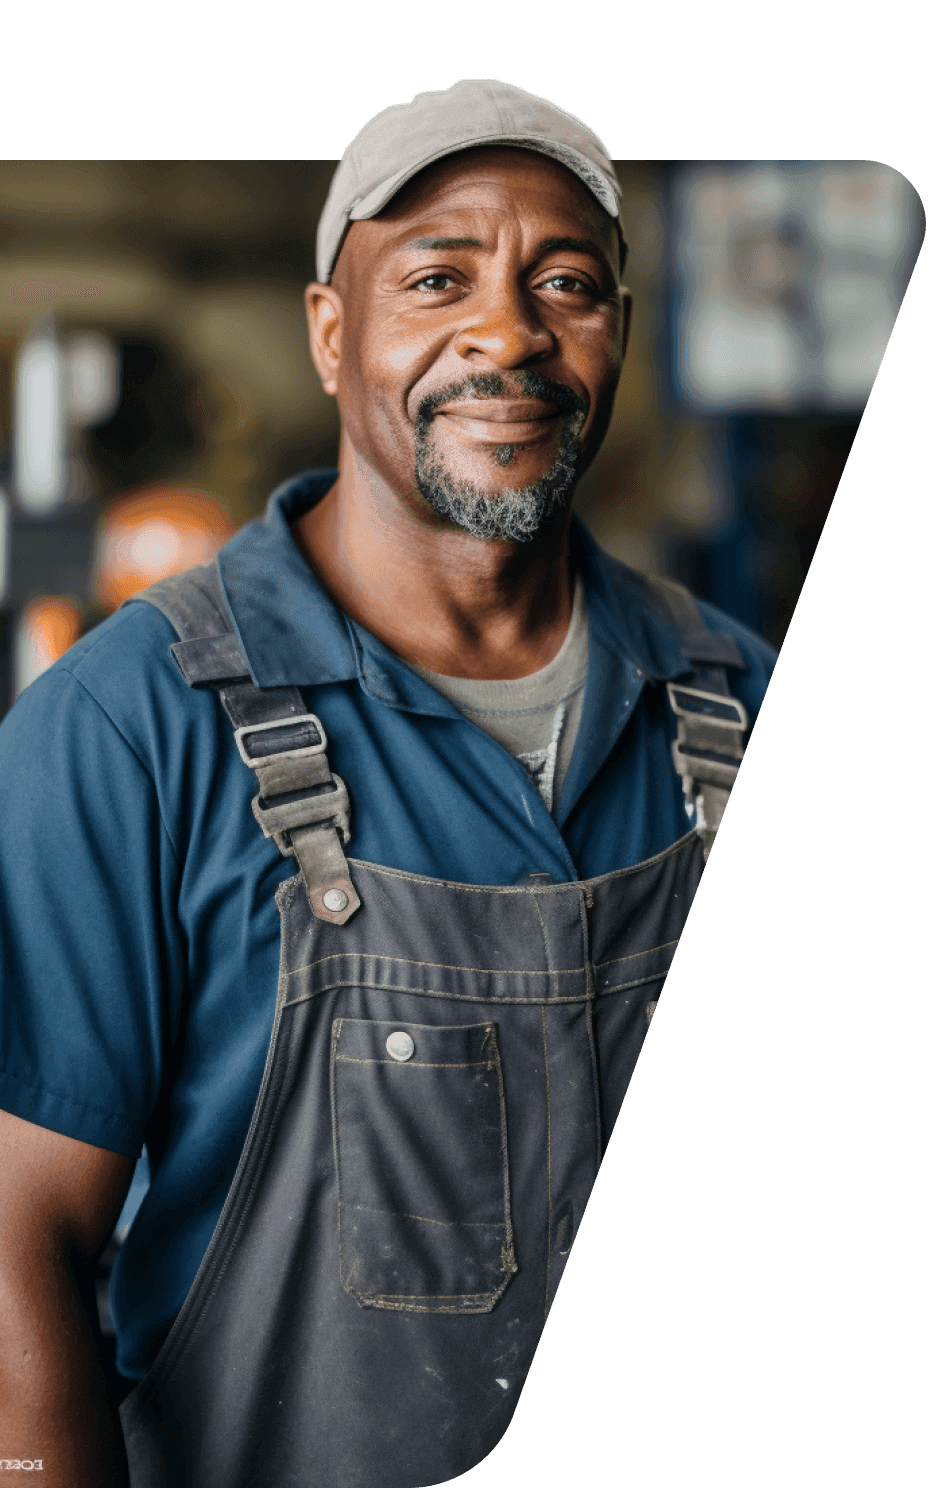 A cheerful black man wearing overalls stands proudly